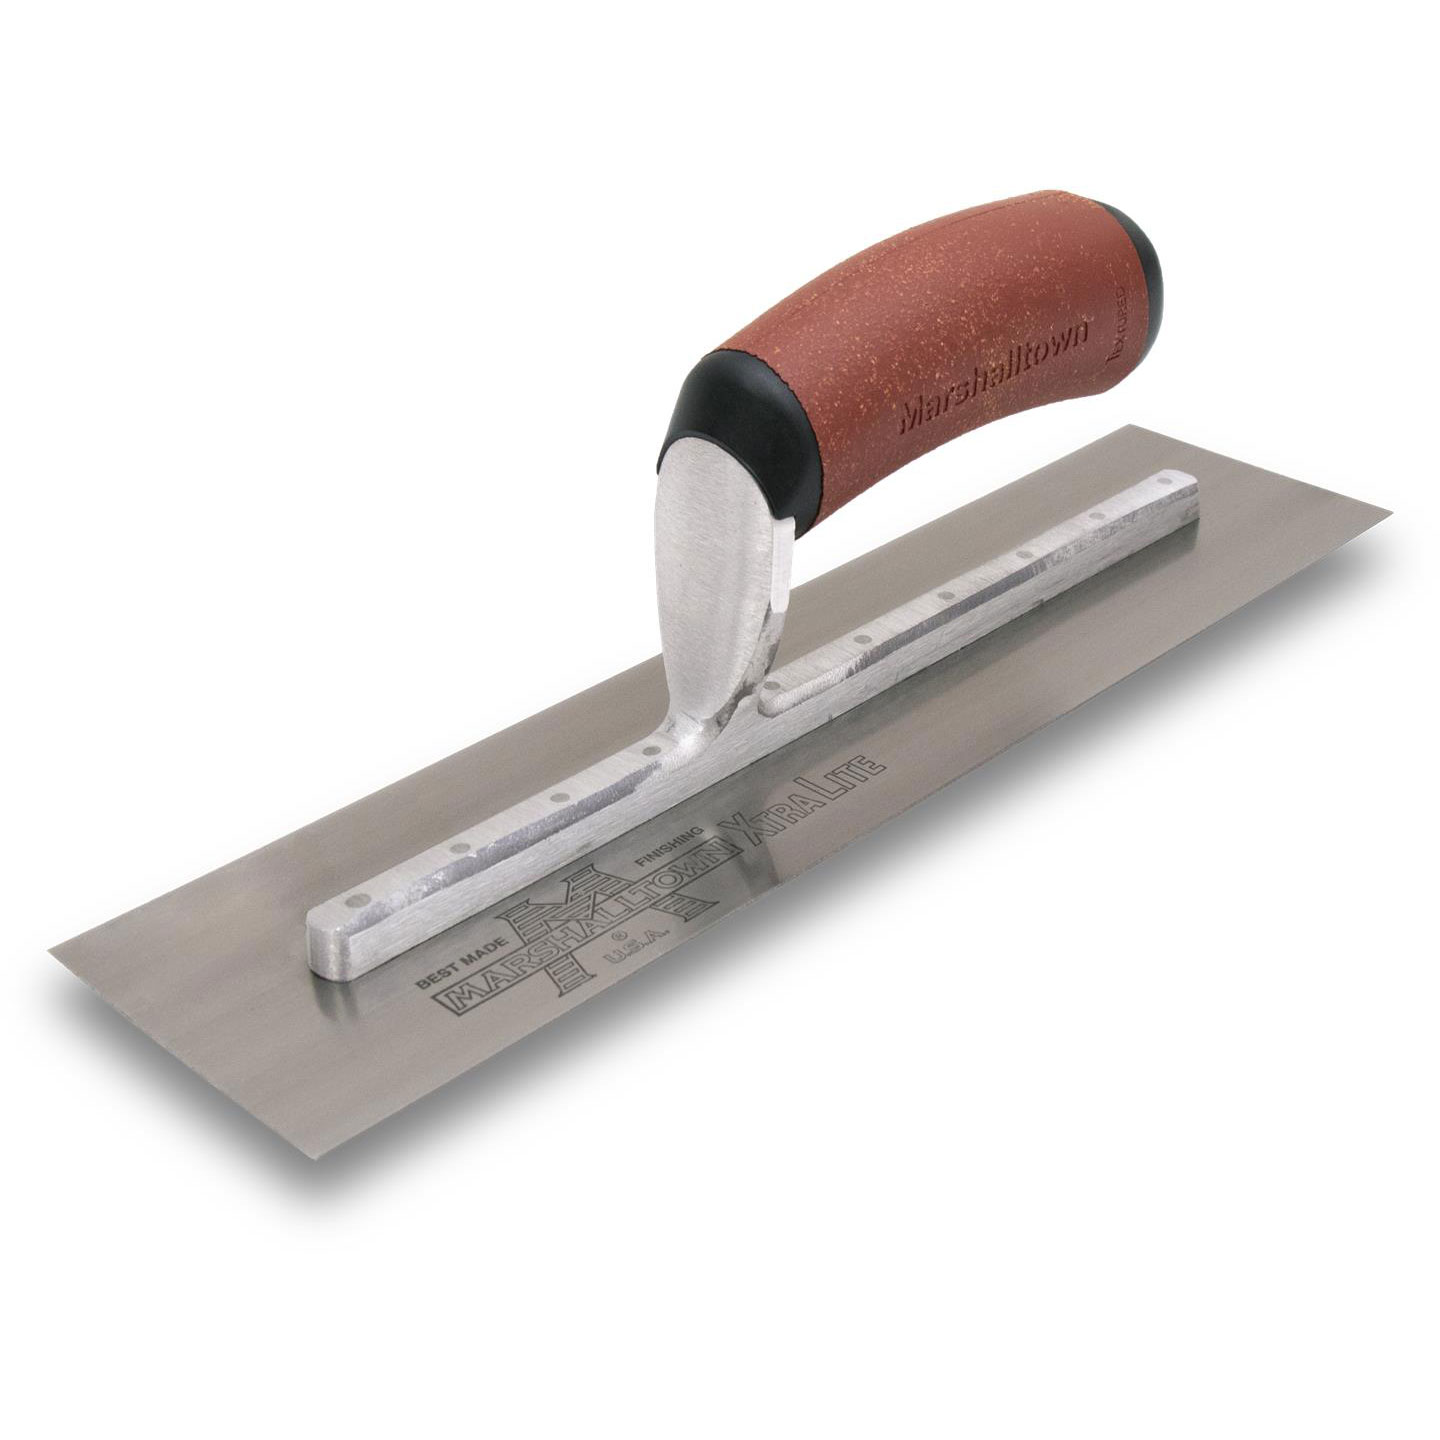 Marshalltown MXS91DC 10-1/2in x 4-1/2in Finishing Trowel with DuraCork Handle MXS91DC